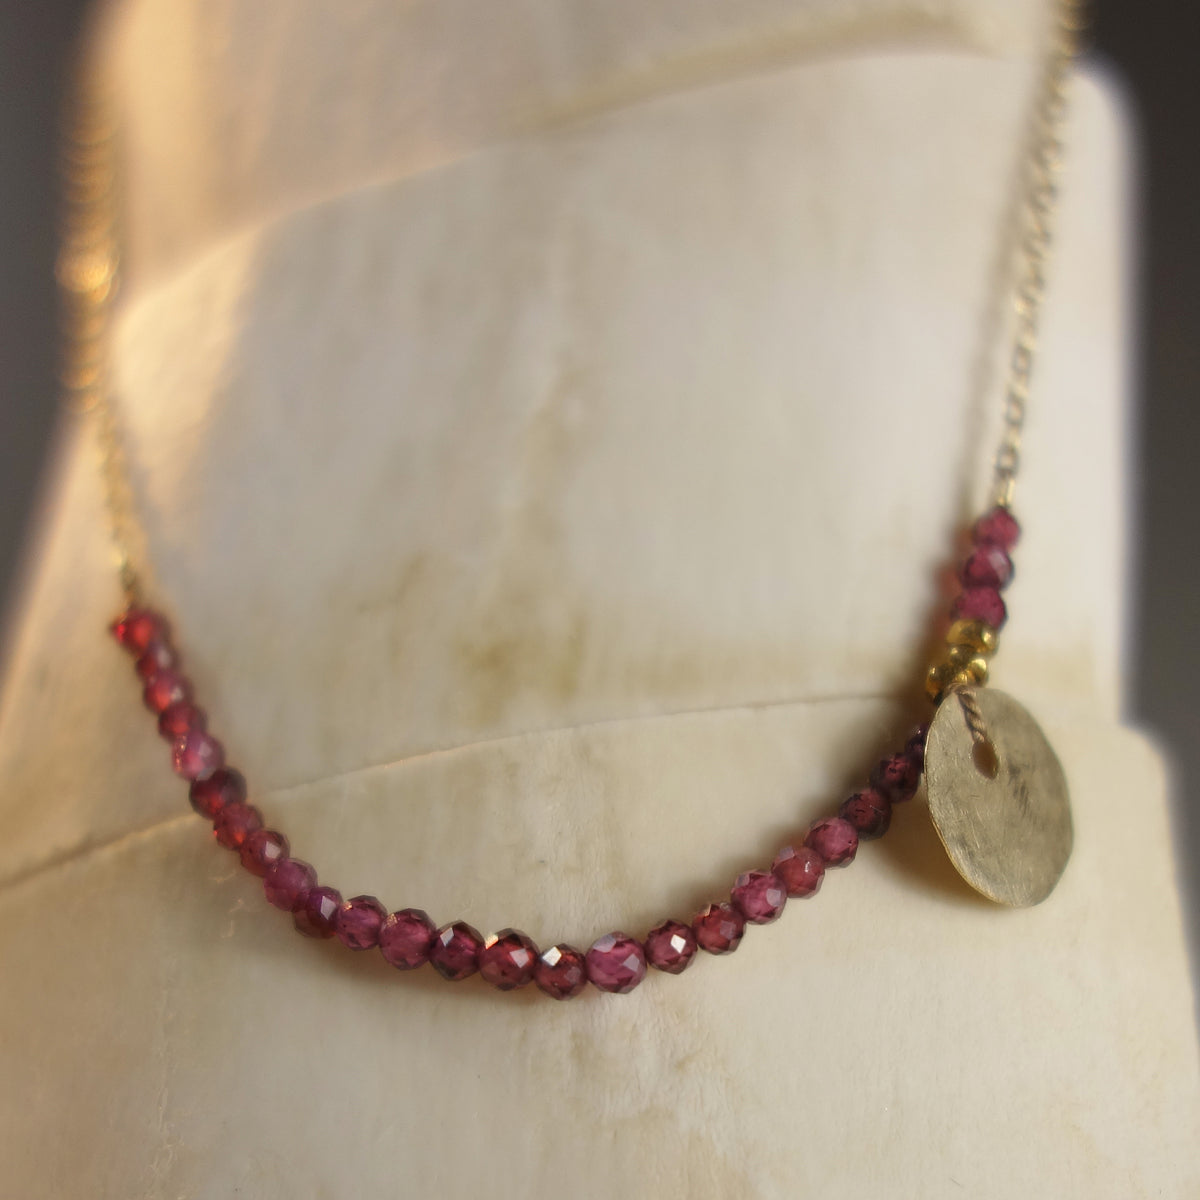 She Spoke Without Words (garnet and gold necklace)